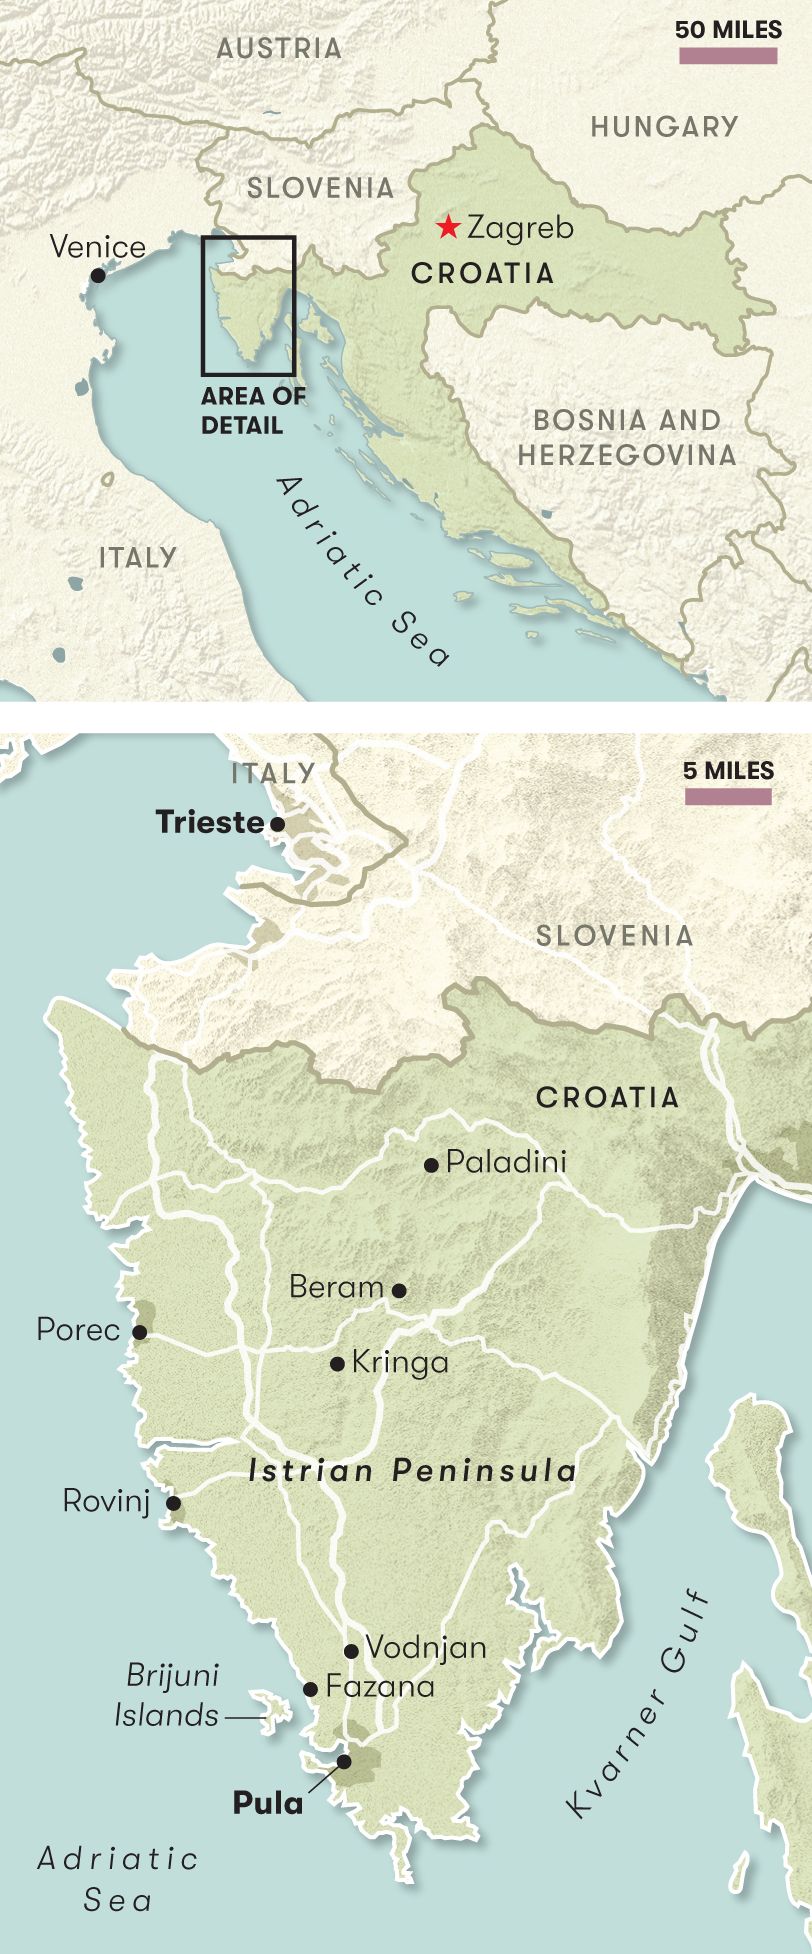 In Istria, Roman Ruins, Unique Wines and Prized Truffles Await